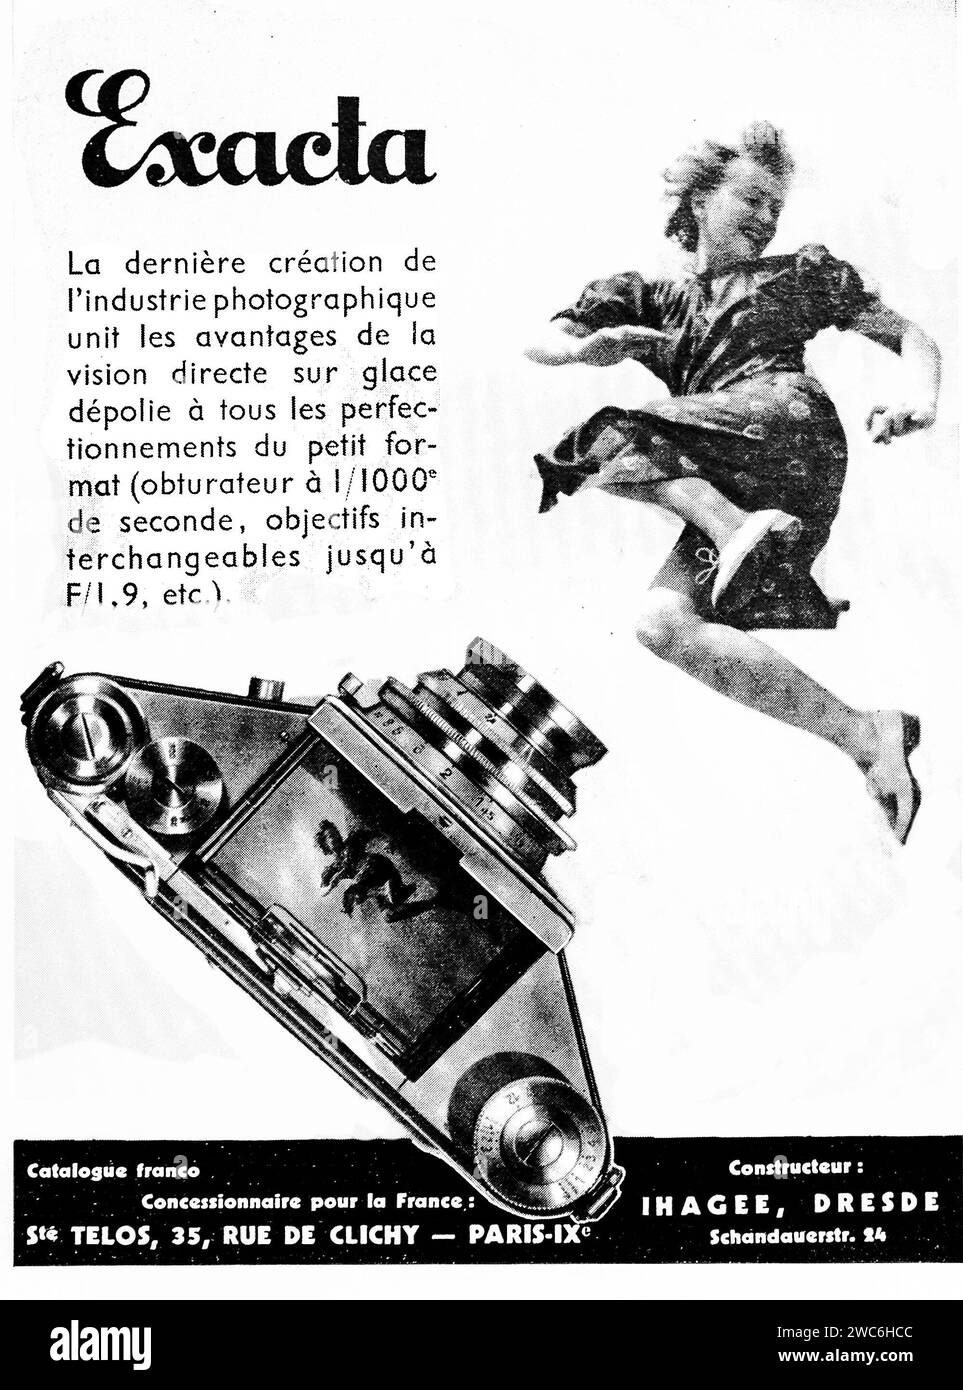 An vintage 1938 print advertisement showcasing the Exakta camera, highlighting its features against a backdrop of a woman seemingly jumping with delight. Stock Photo